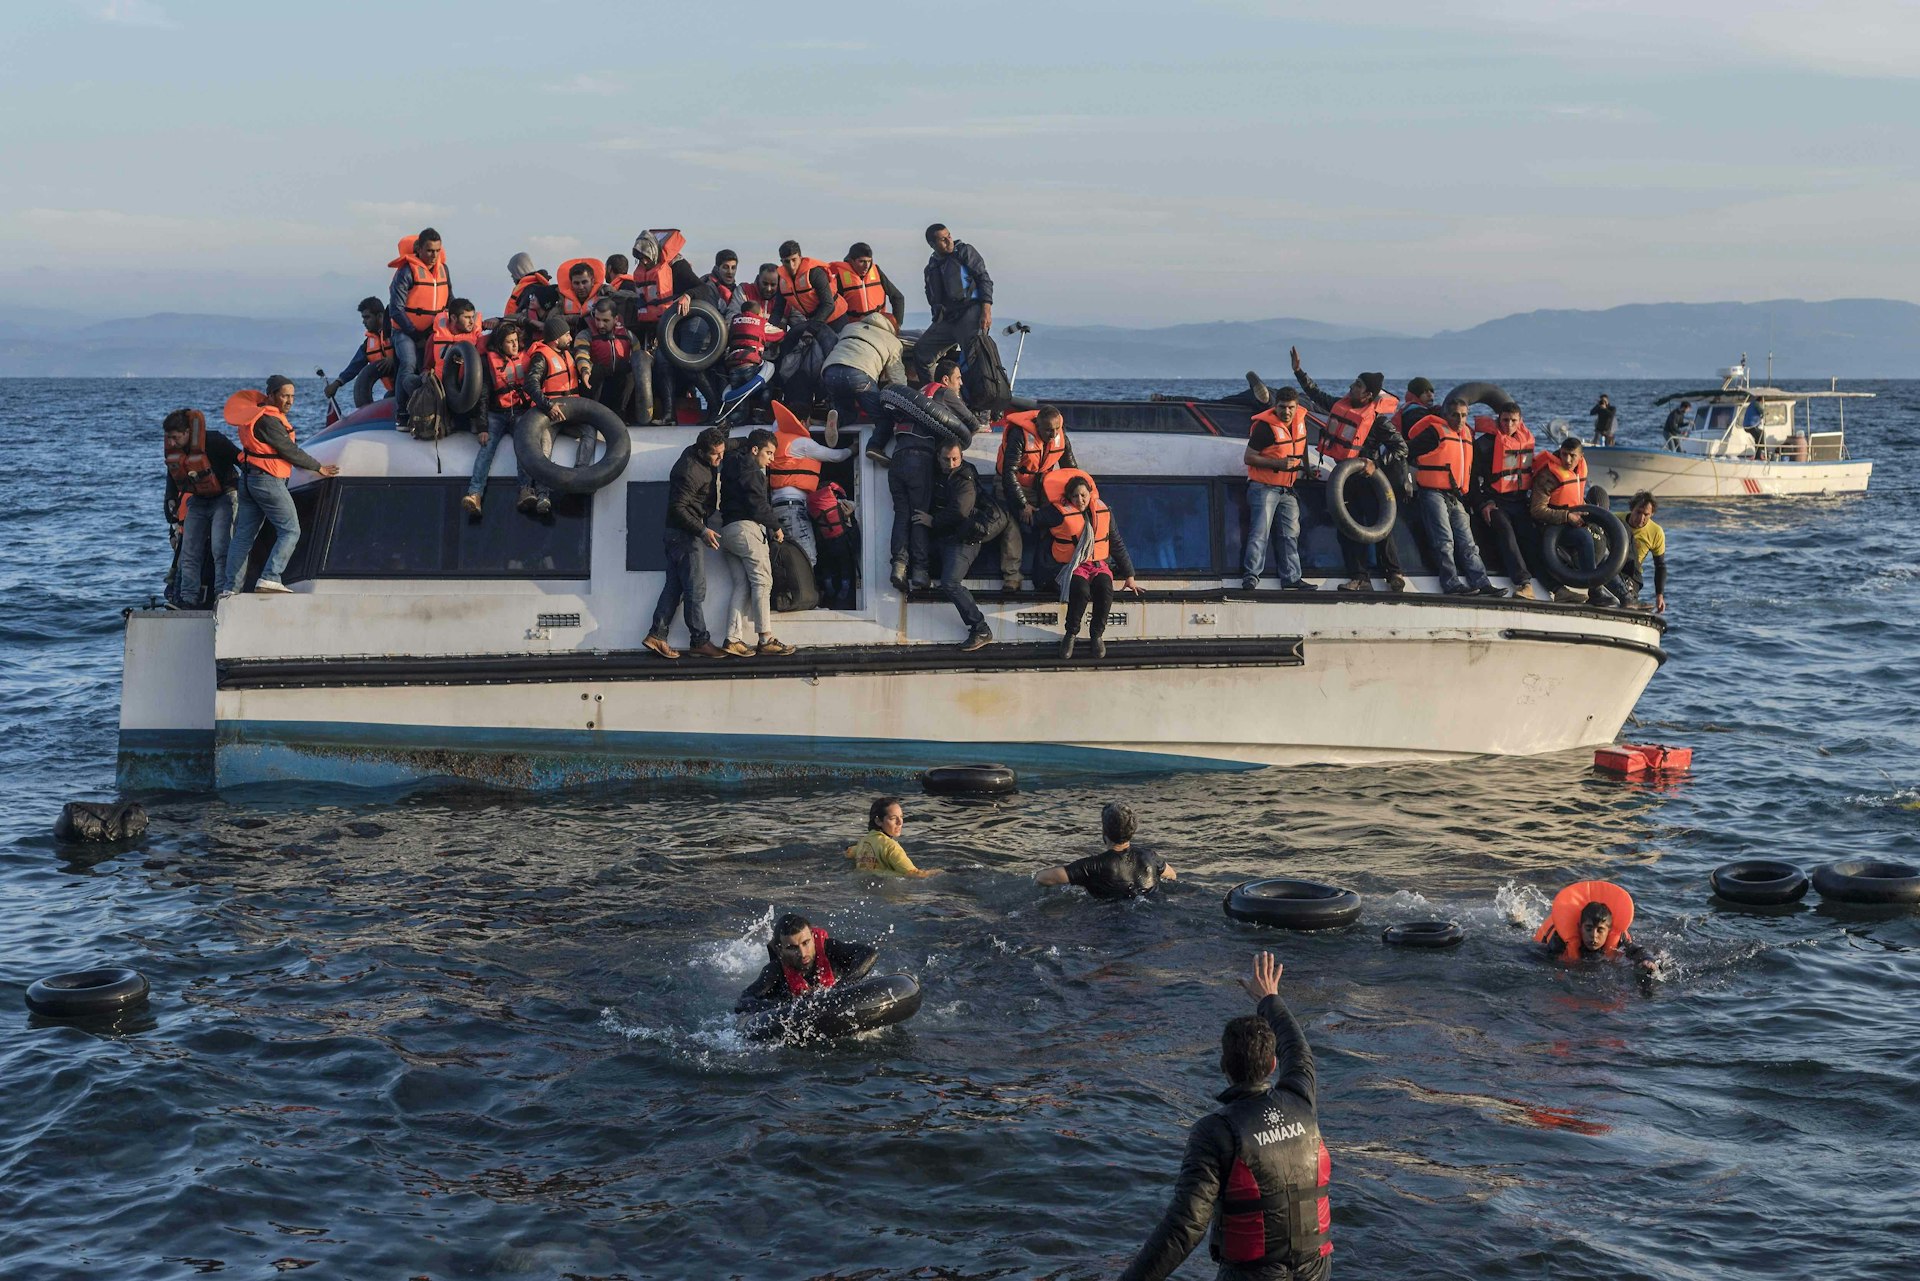 The Italian Mafia is making cash by exploiting refugees